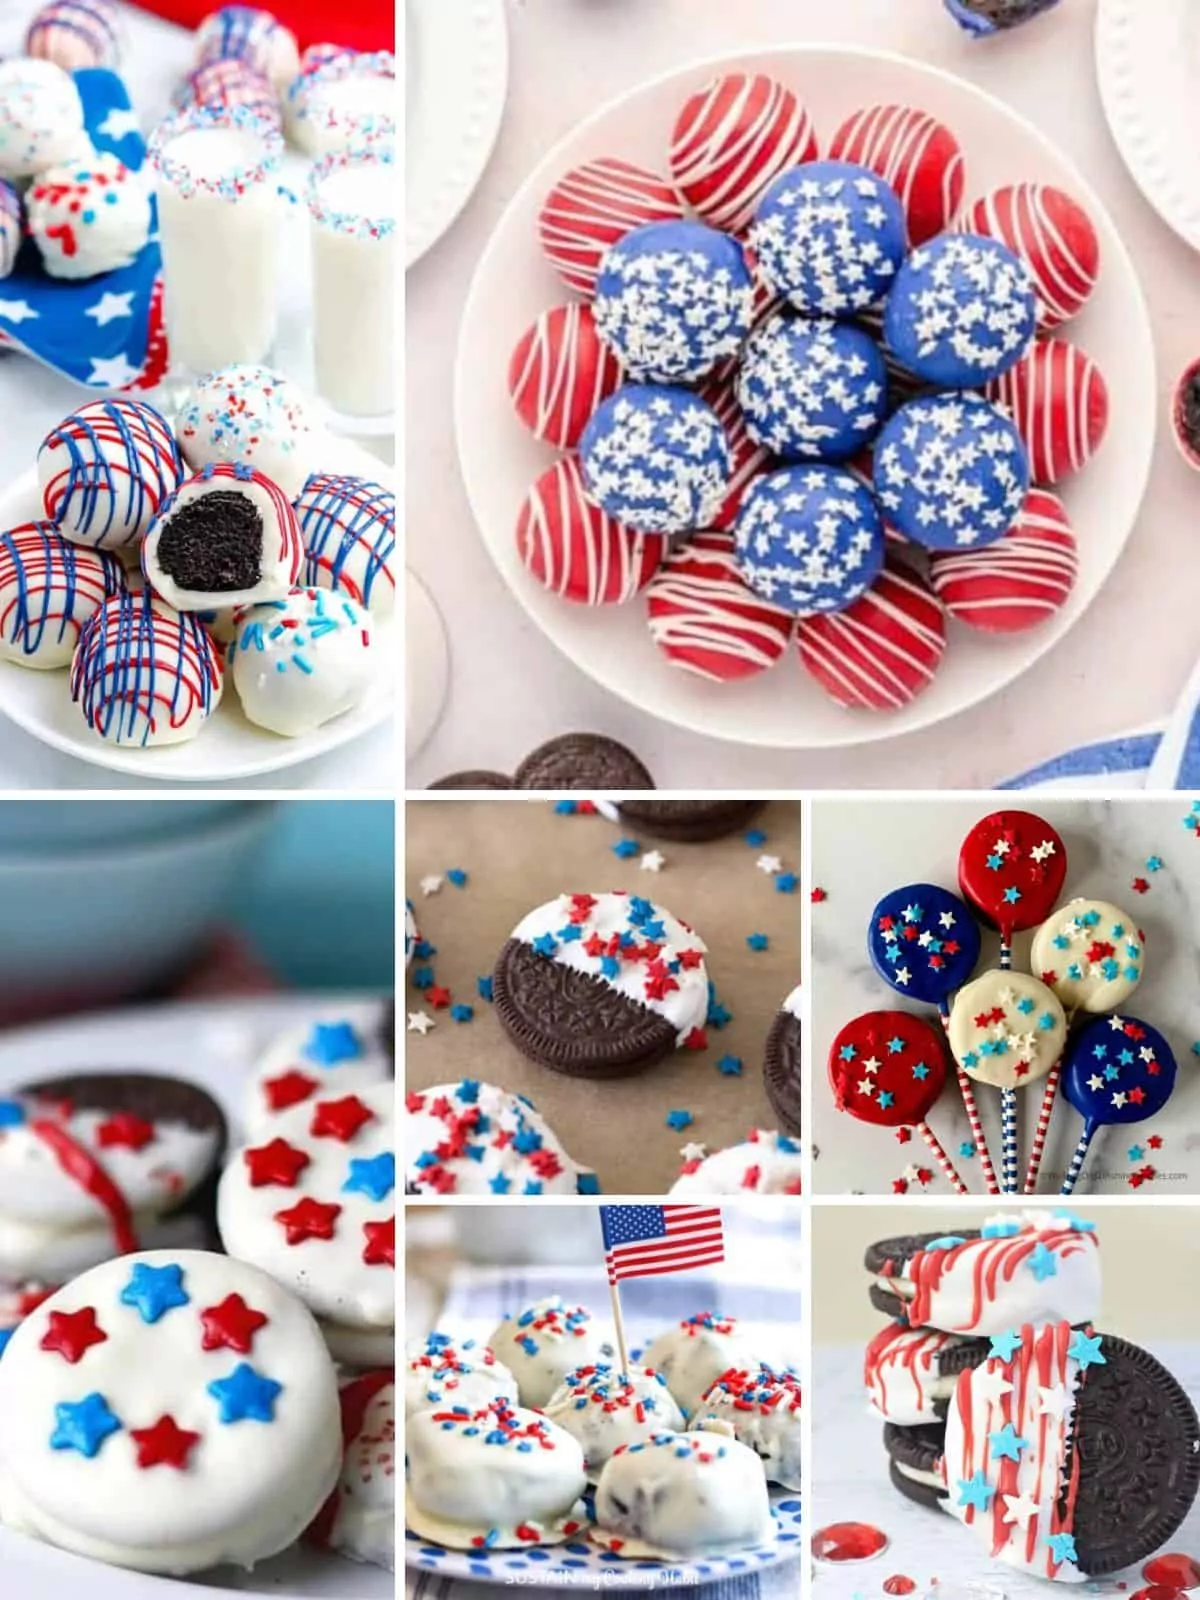 Oreo cookie recipes for July 4th.